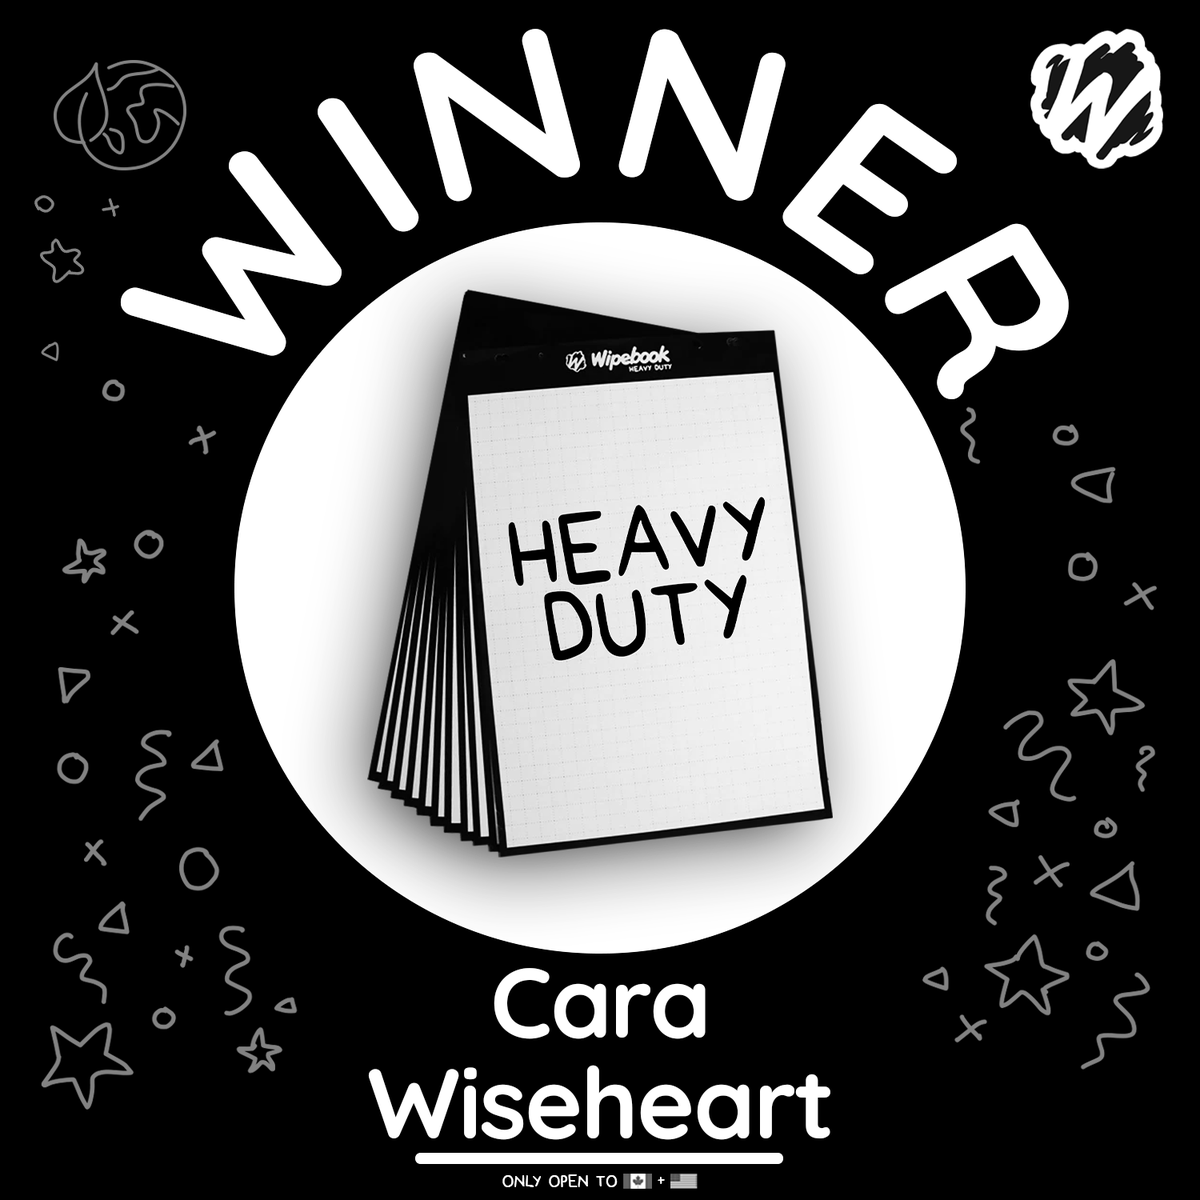 Congratulations Cara Wiseheart, our weekly Heavy Duty Flipchart winner! 💪 Enter the NEW WEEKLY Raffle: wipebook.com/heavydutyX #heavyduty #flipchart #contest #giveaway #win